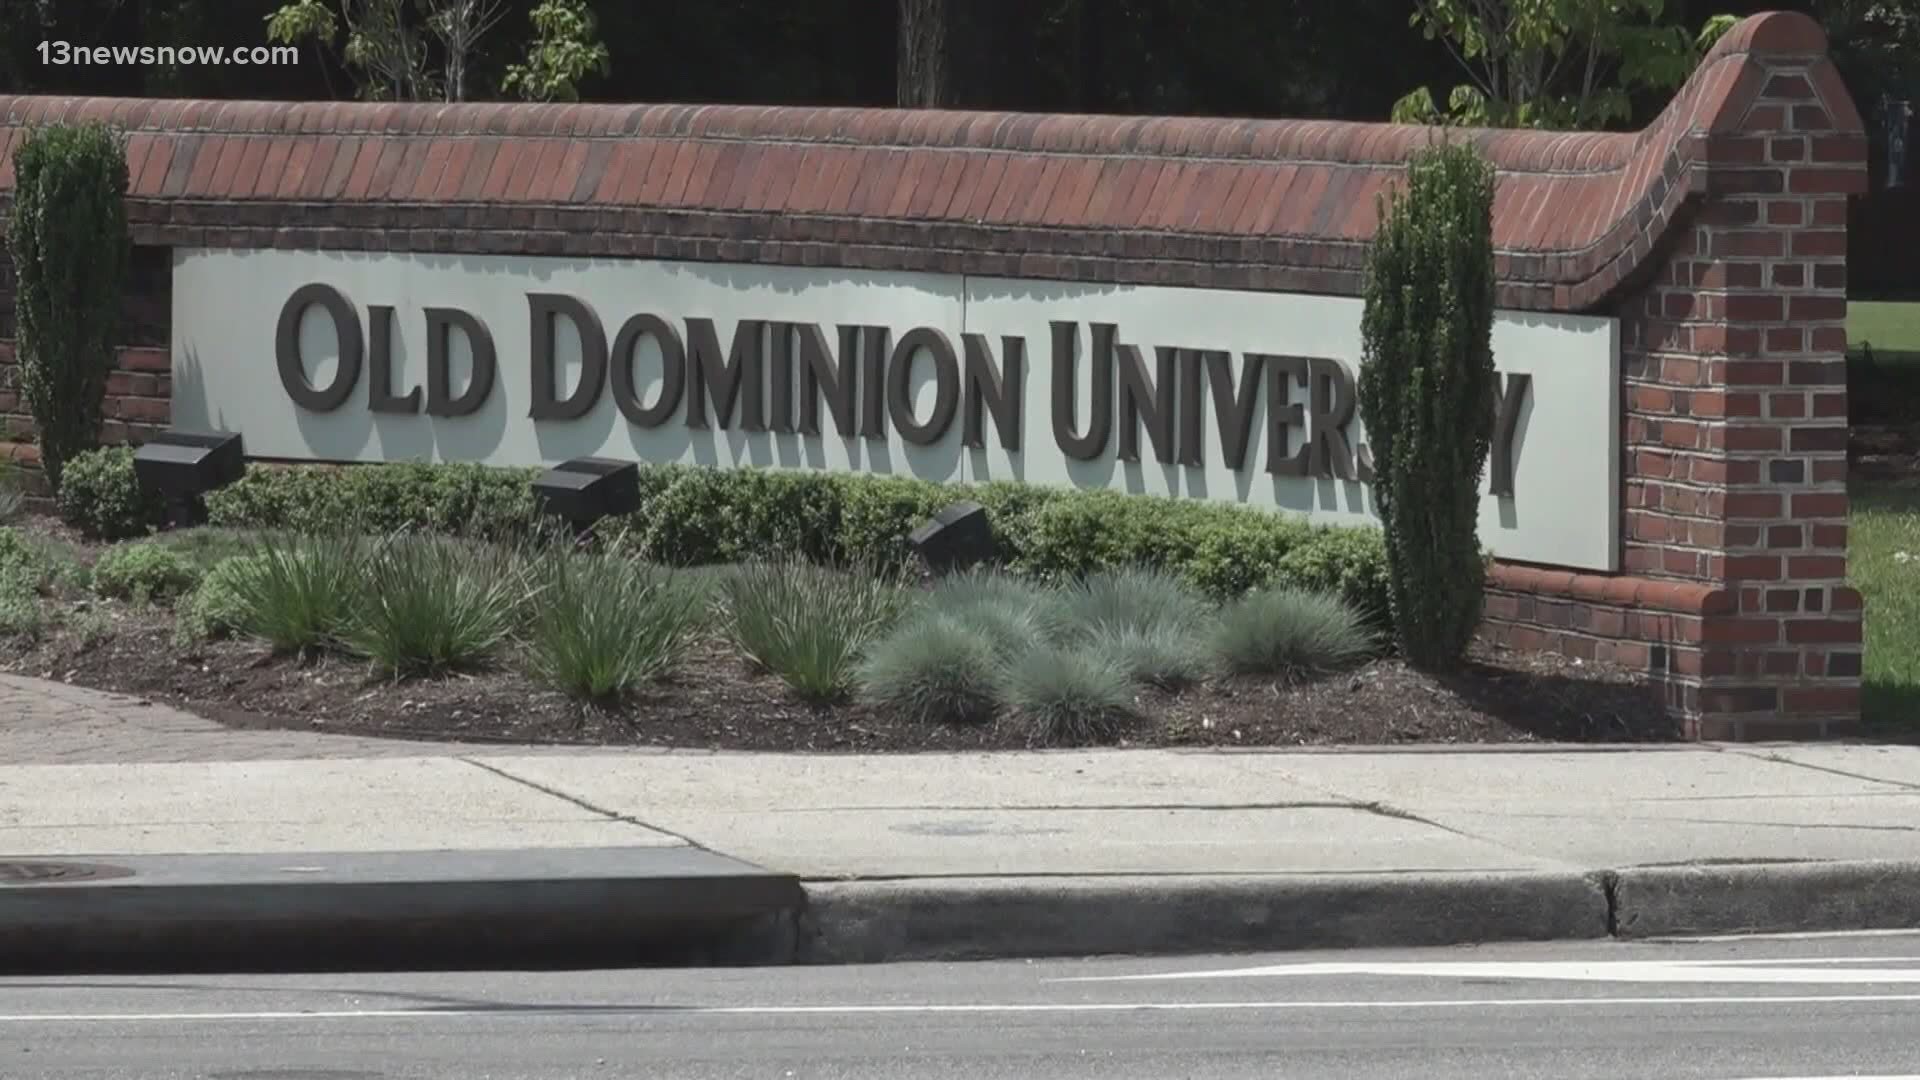 ODU said the outbreak happened in the Whitehurst residence hall, which houses 389 students.